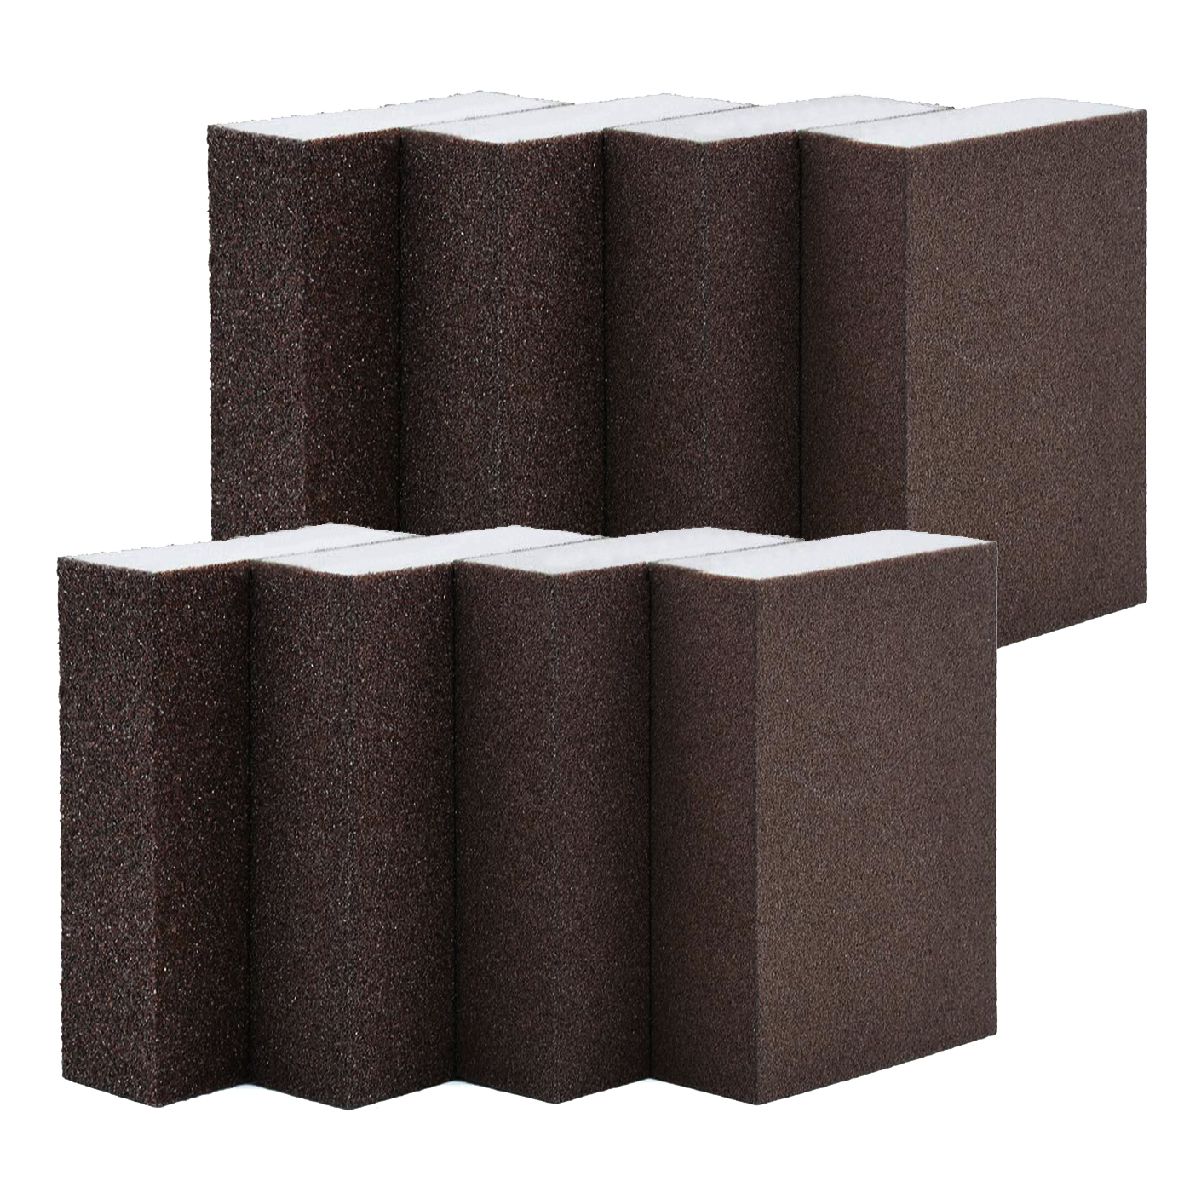 60/100/180/220 Grits 4 Different Specifications Onarway Sanding Sponges 4 Pack Wet and Dry Dual-use Ideal for Wood Metal Wall Polish Washable and Reusable Coarse and Fine Sanding Blocks 